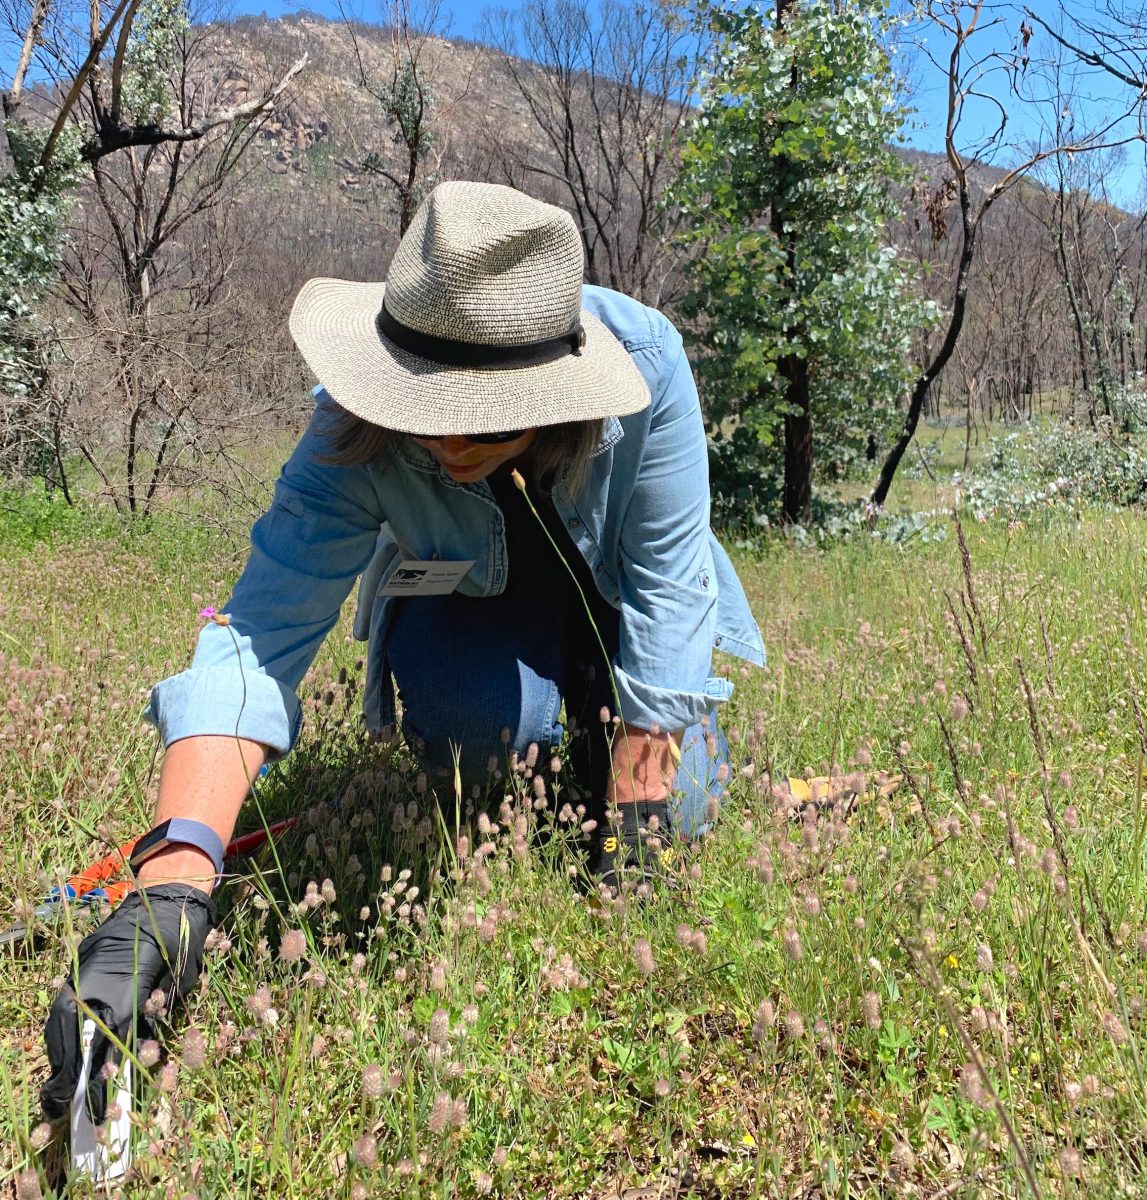 A volunteer weeds and dabs herbicide on weeds at Namadgi National Park on Sunday, 15 November.